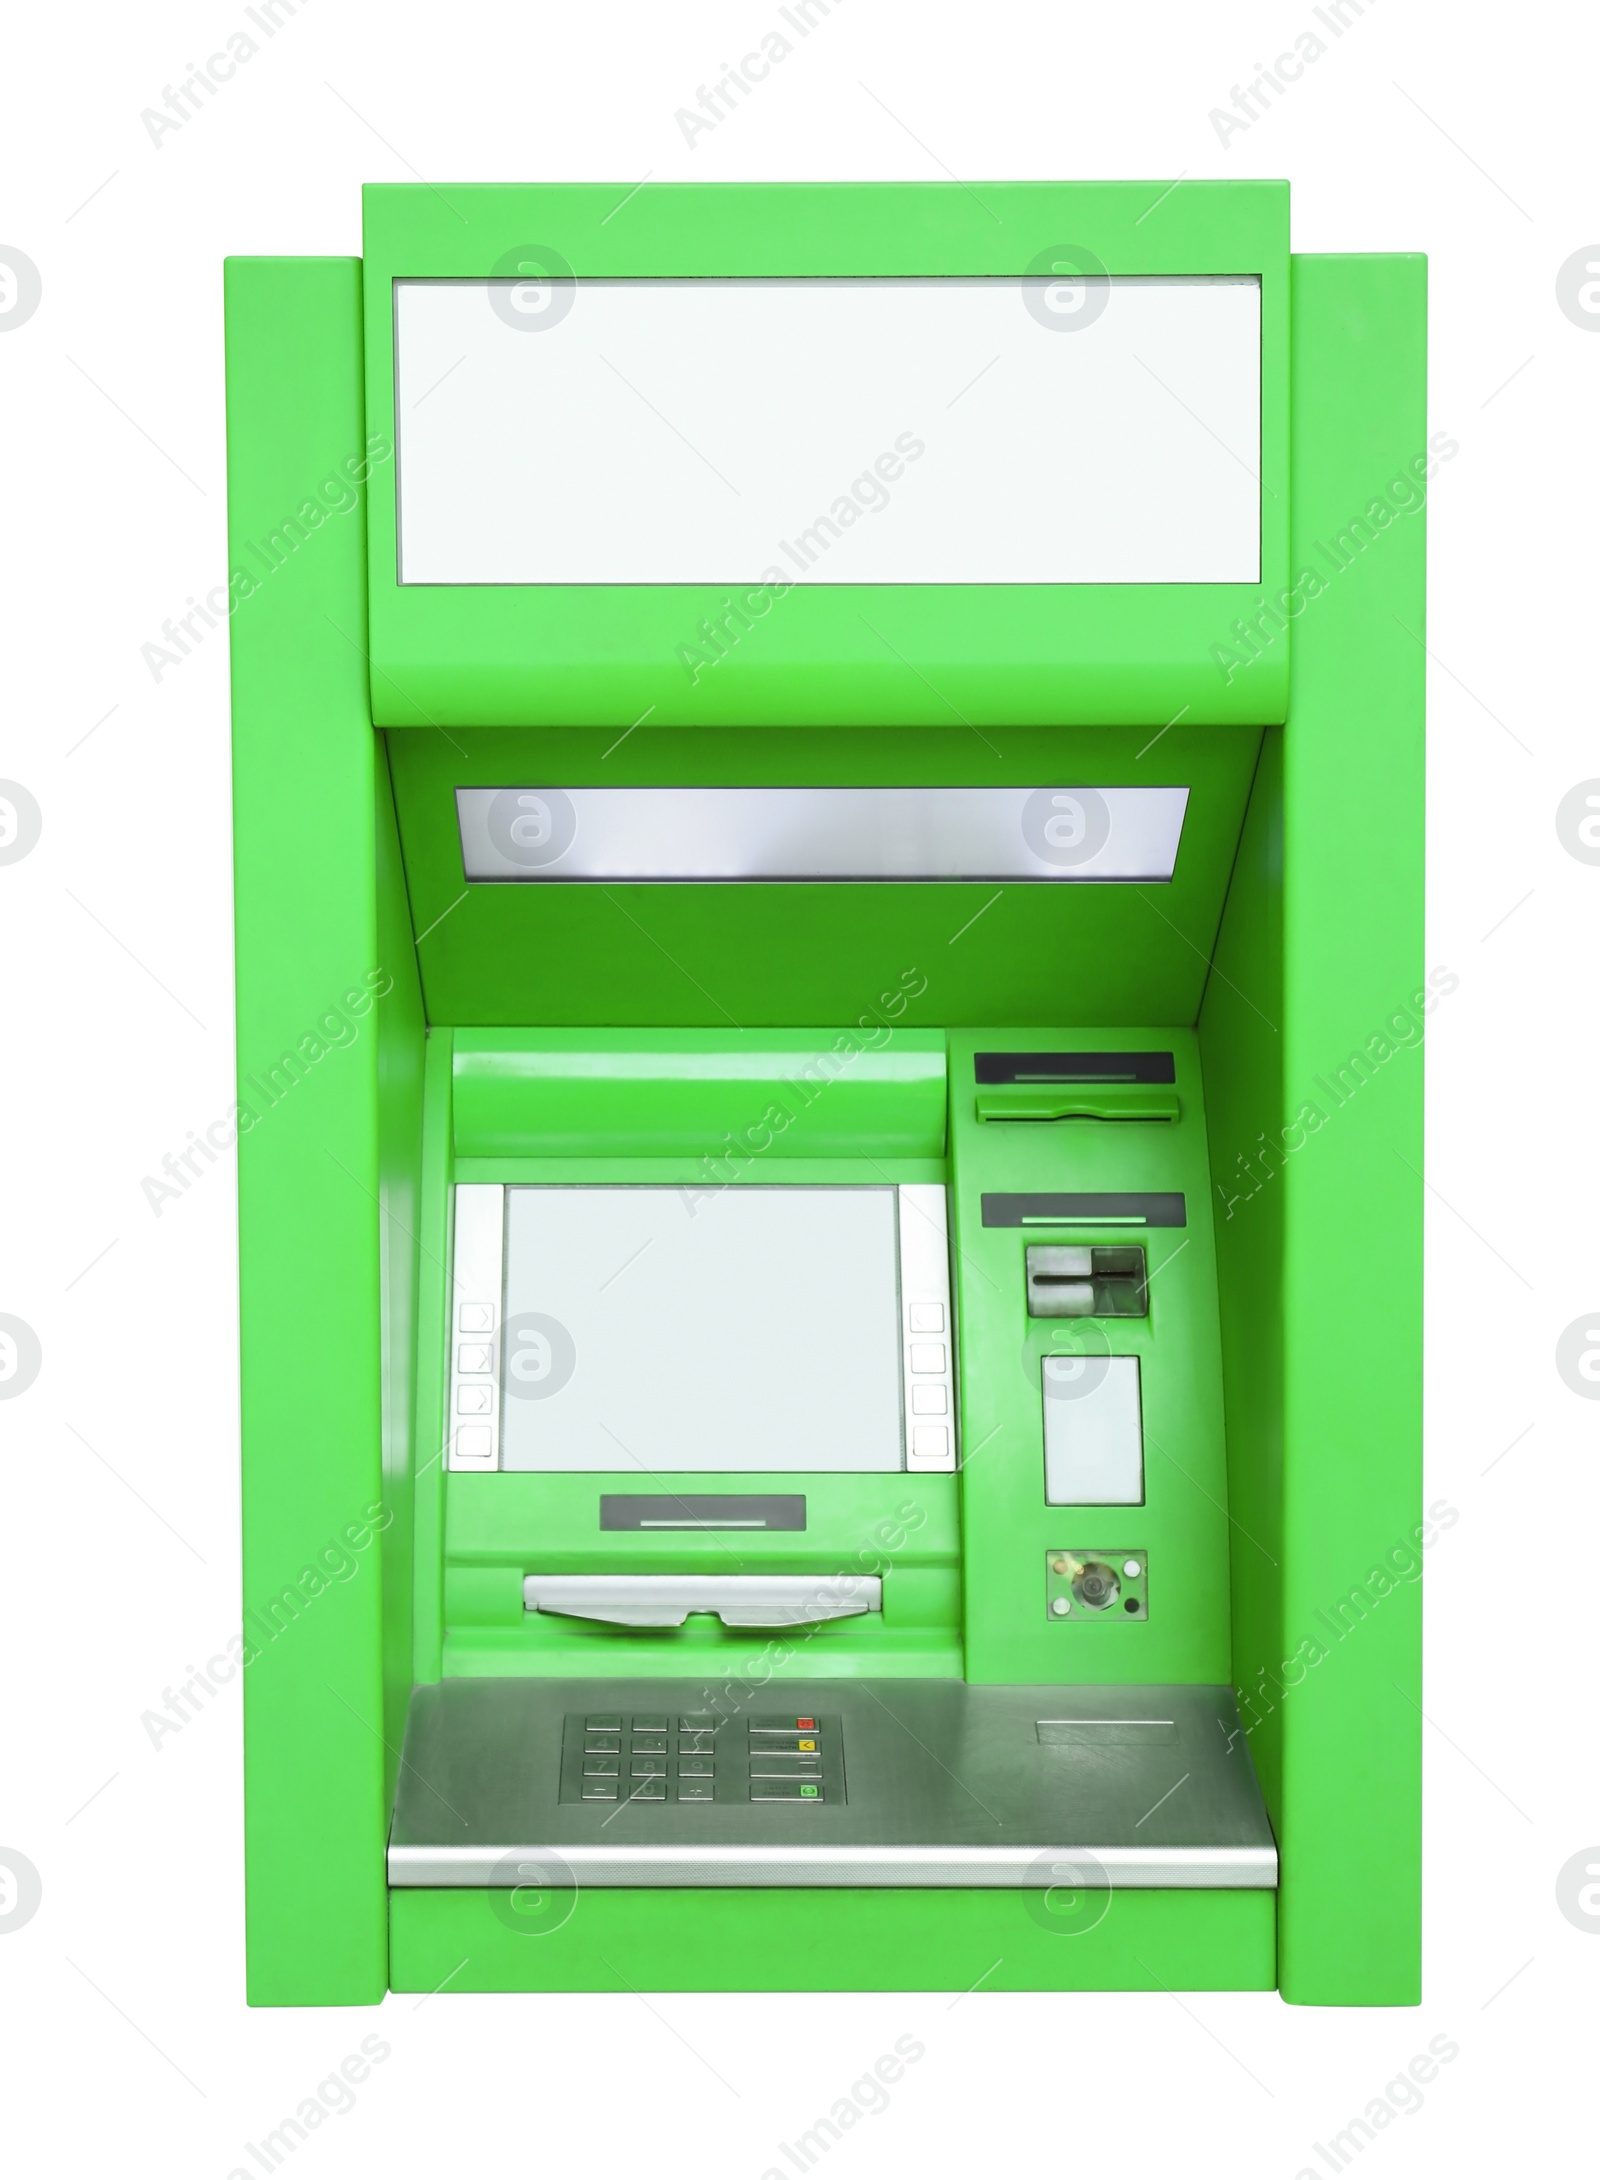 Photo of Modern automated cash machine isolated on white